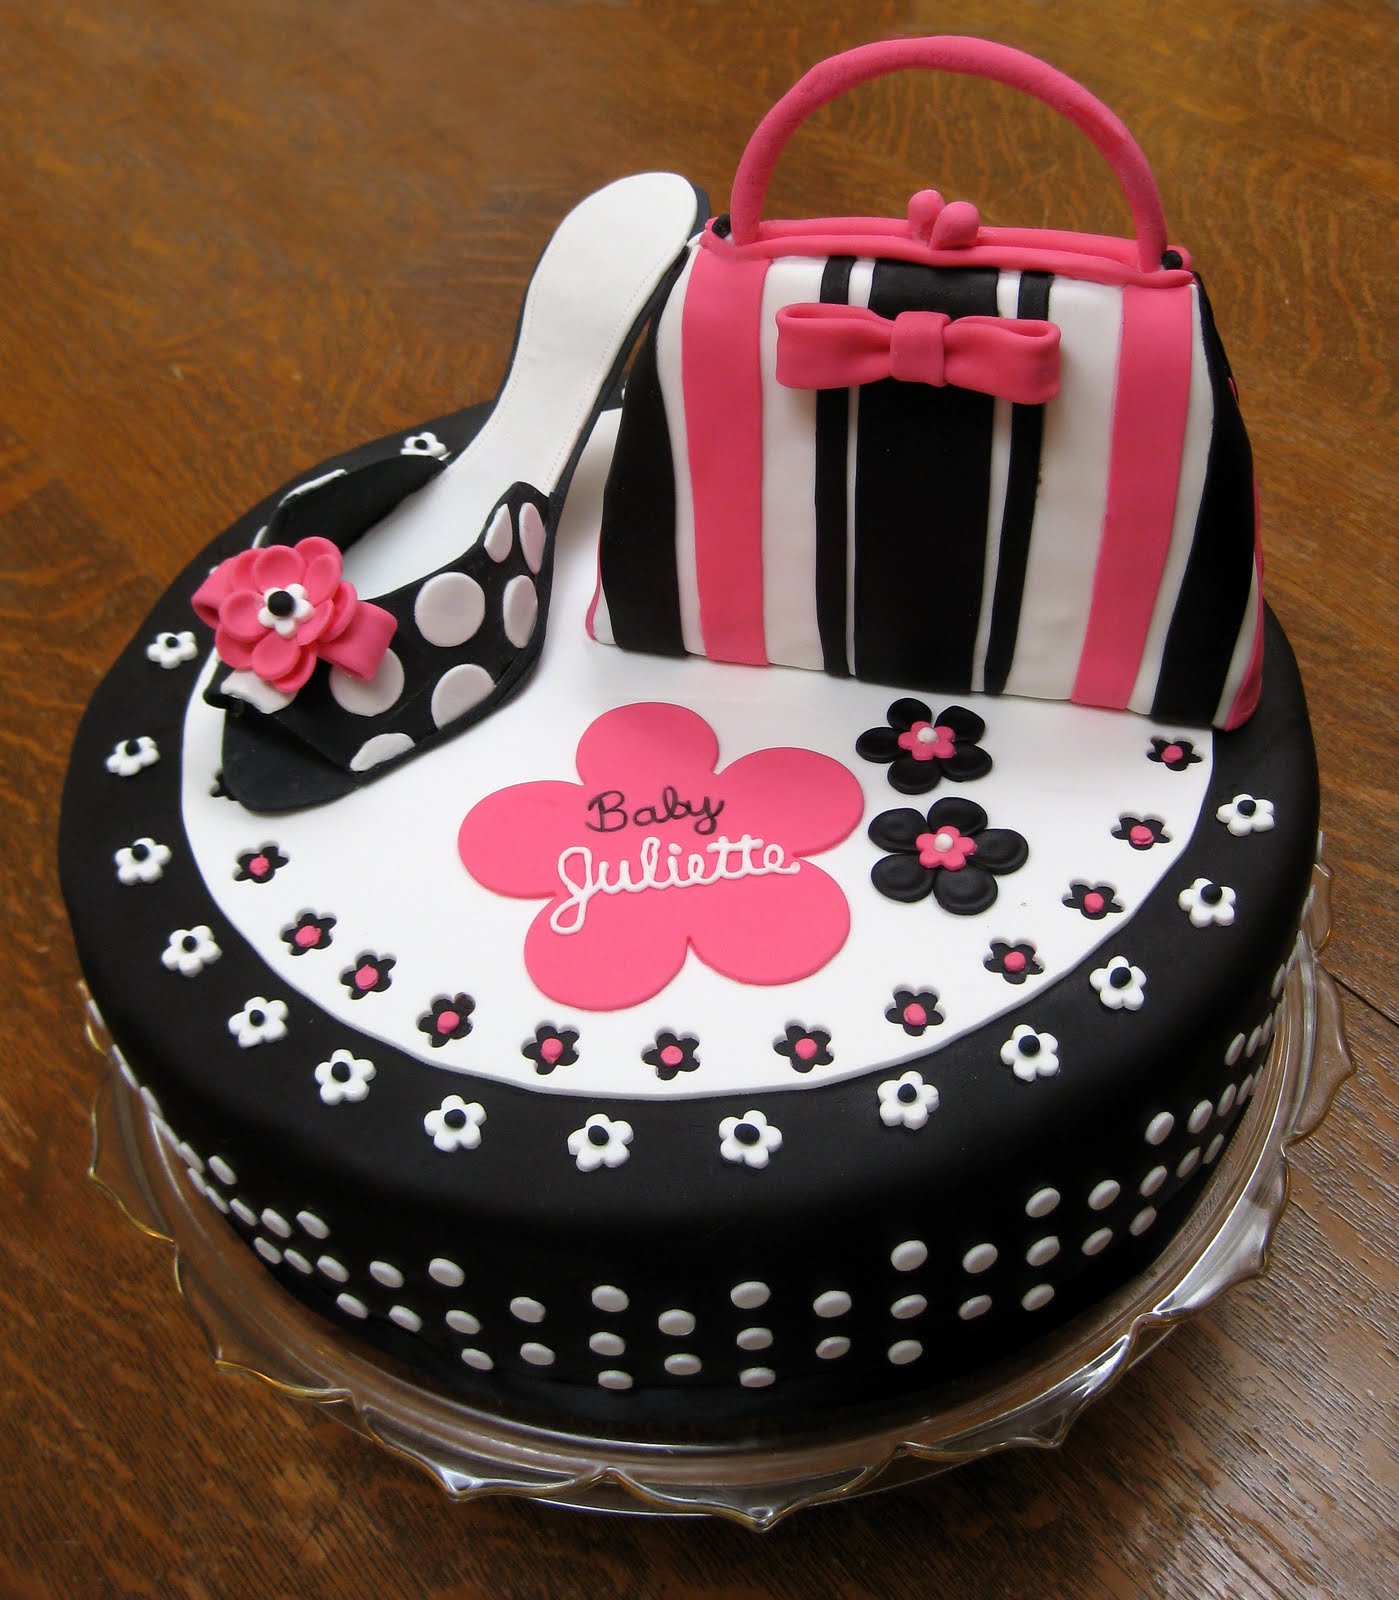 cool cake Black and Hot Pink Cake for the Baby (with polka dots!)